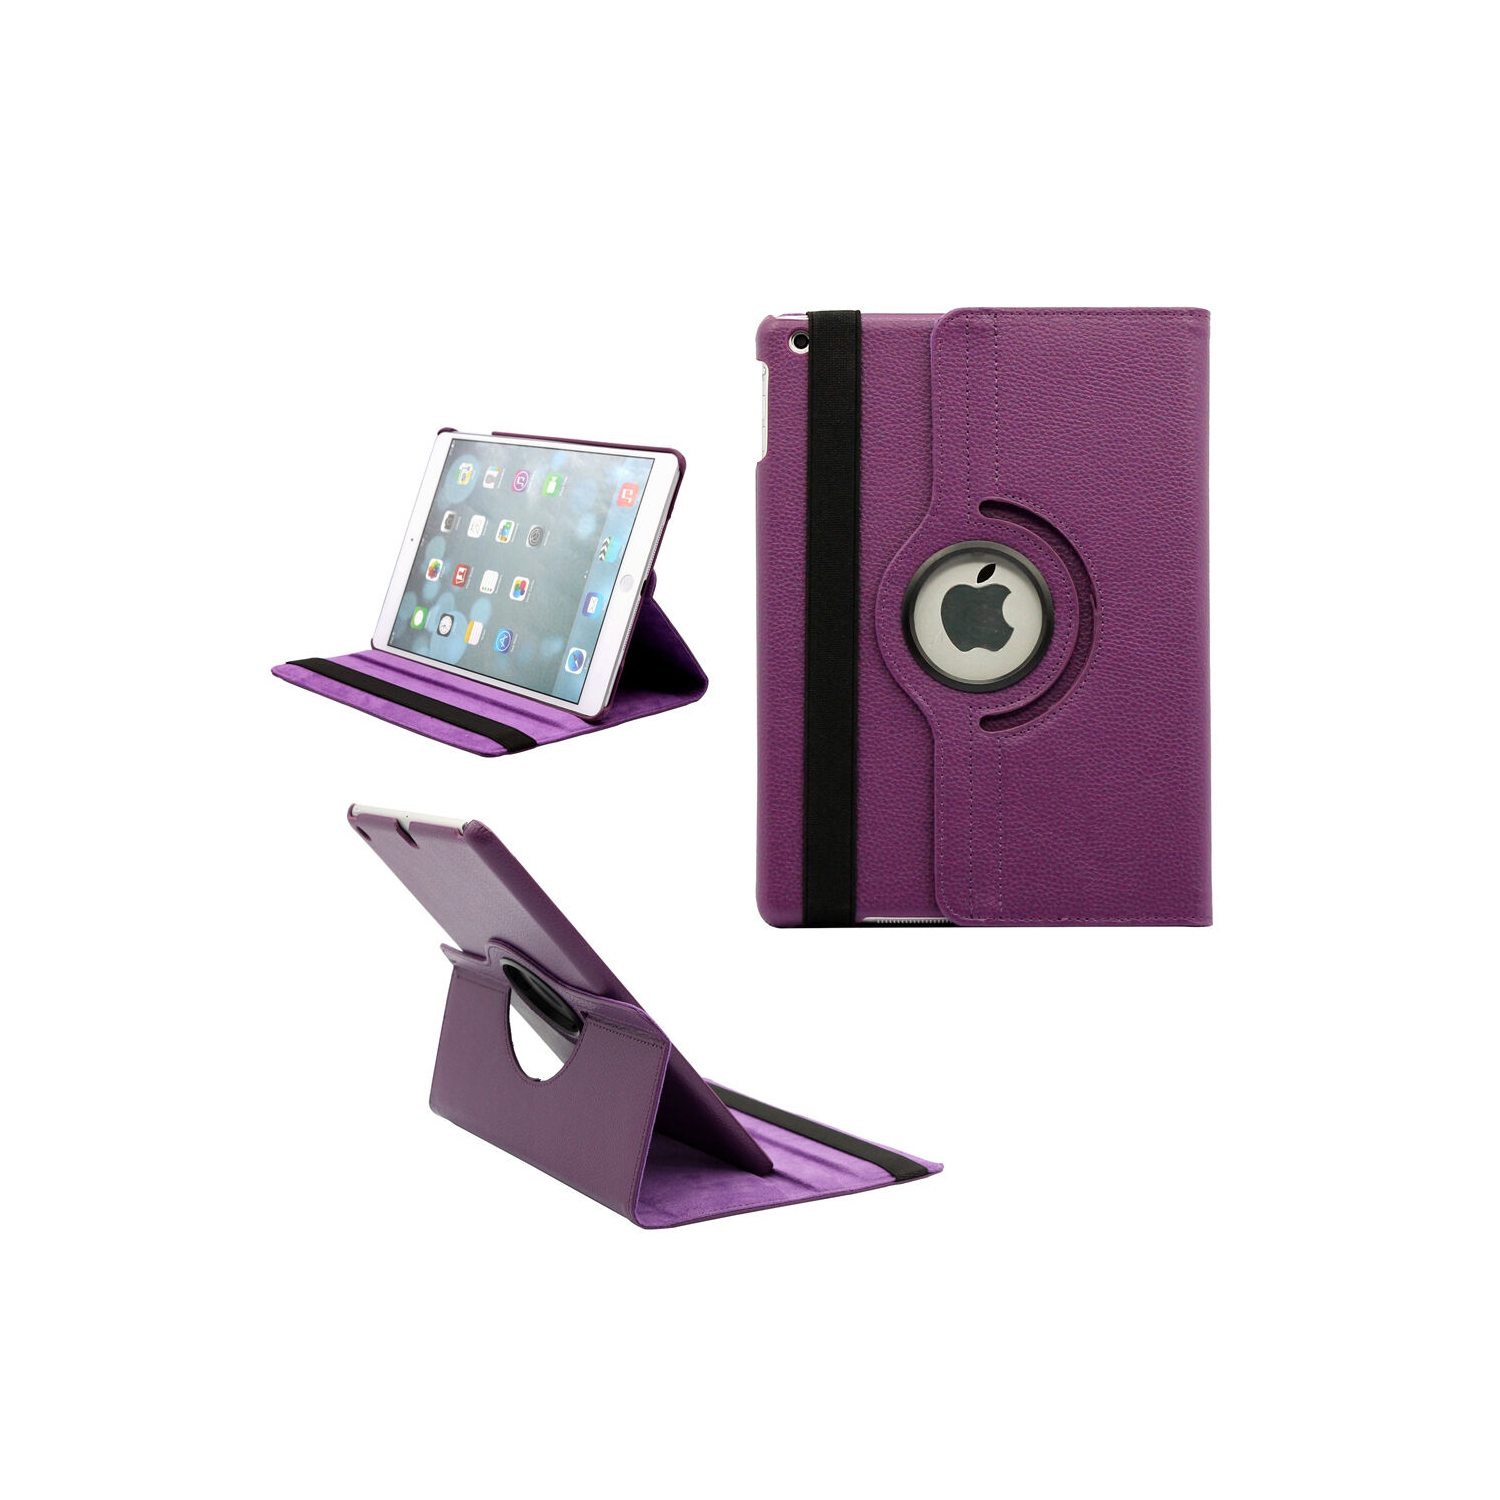 【CSmart】 360 Rotating PU Leather Stand Case Smart Cover for iPad Air 1 2 1st 2nd Gen, Purple